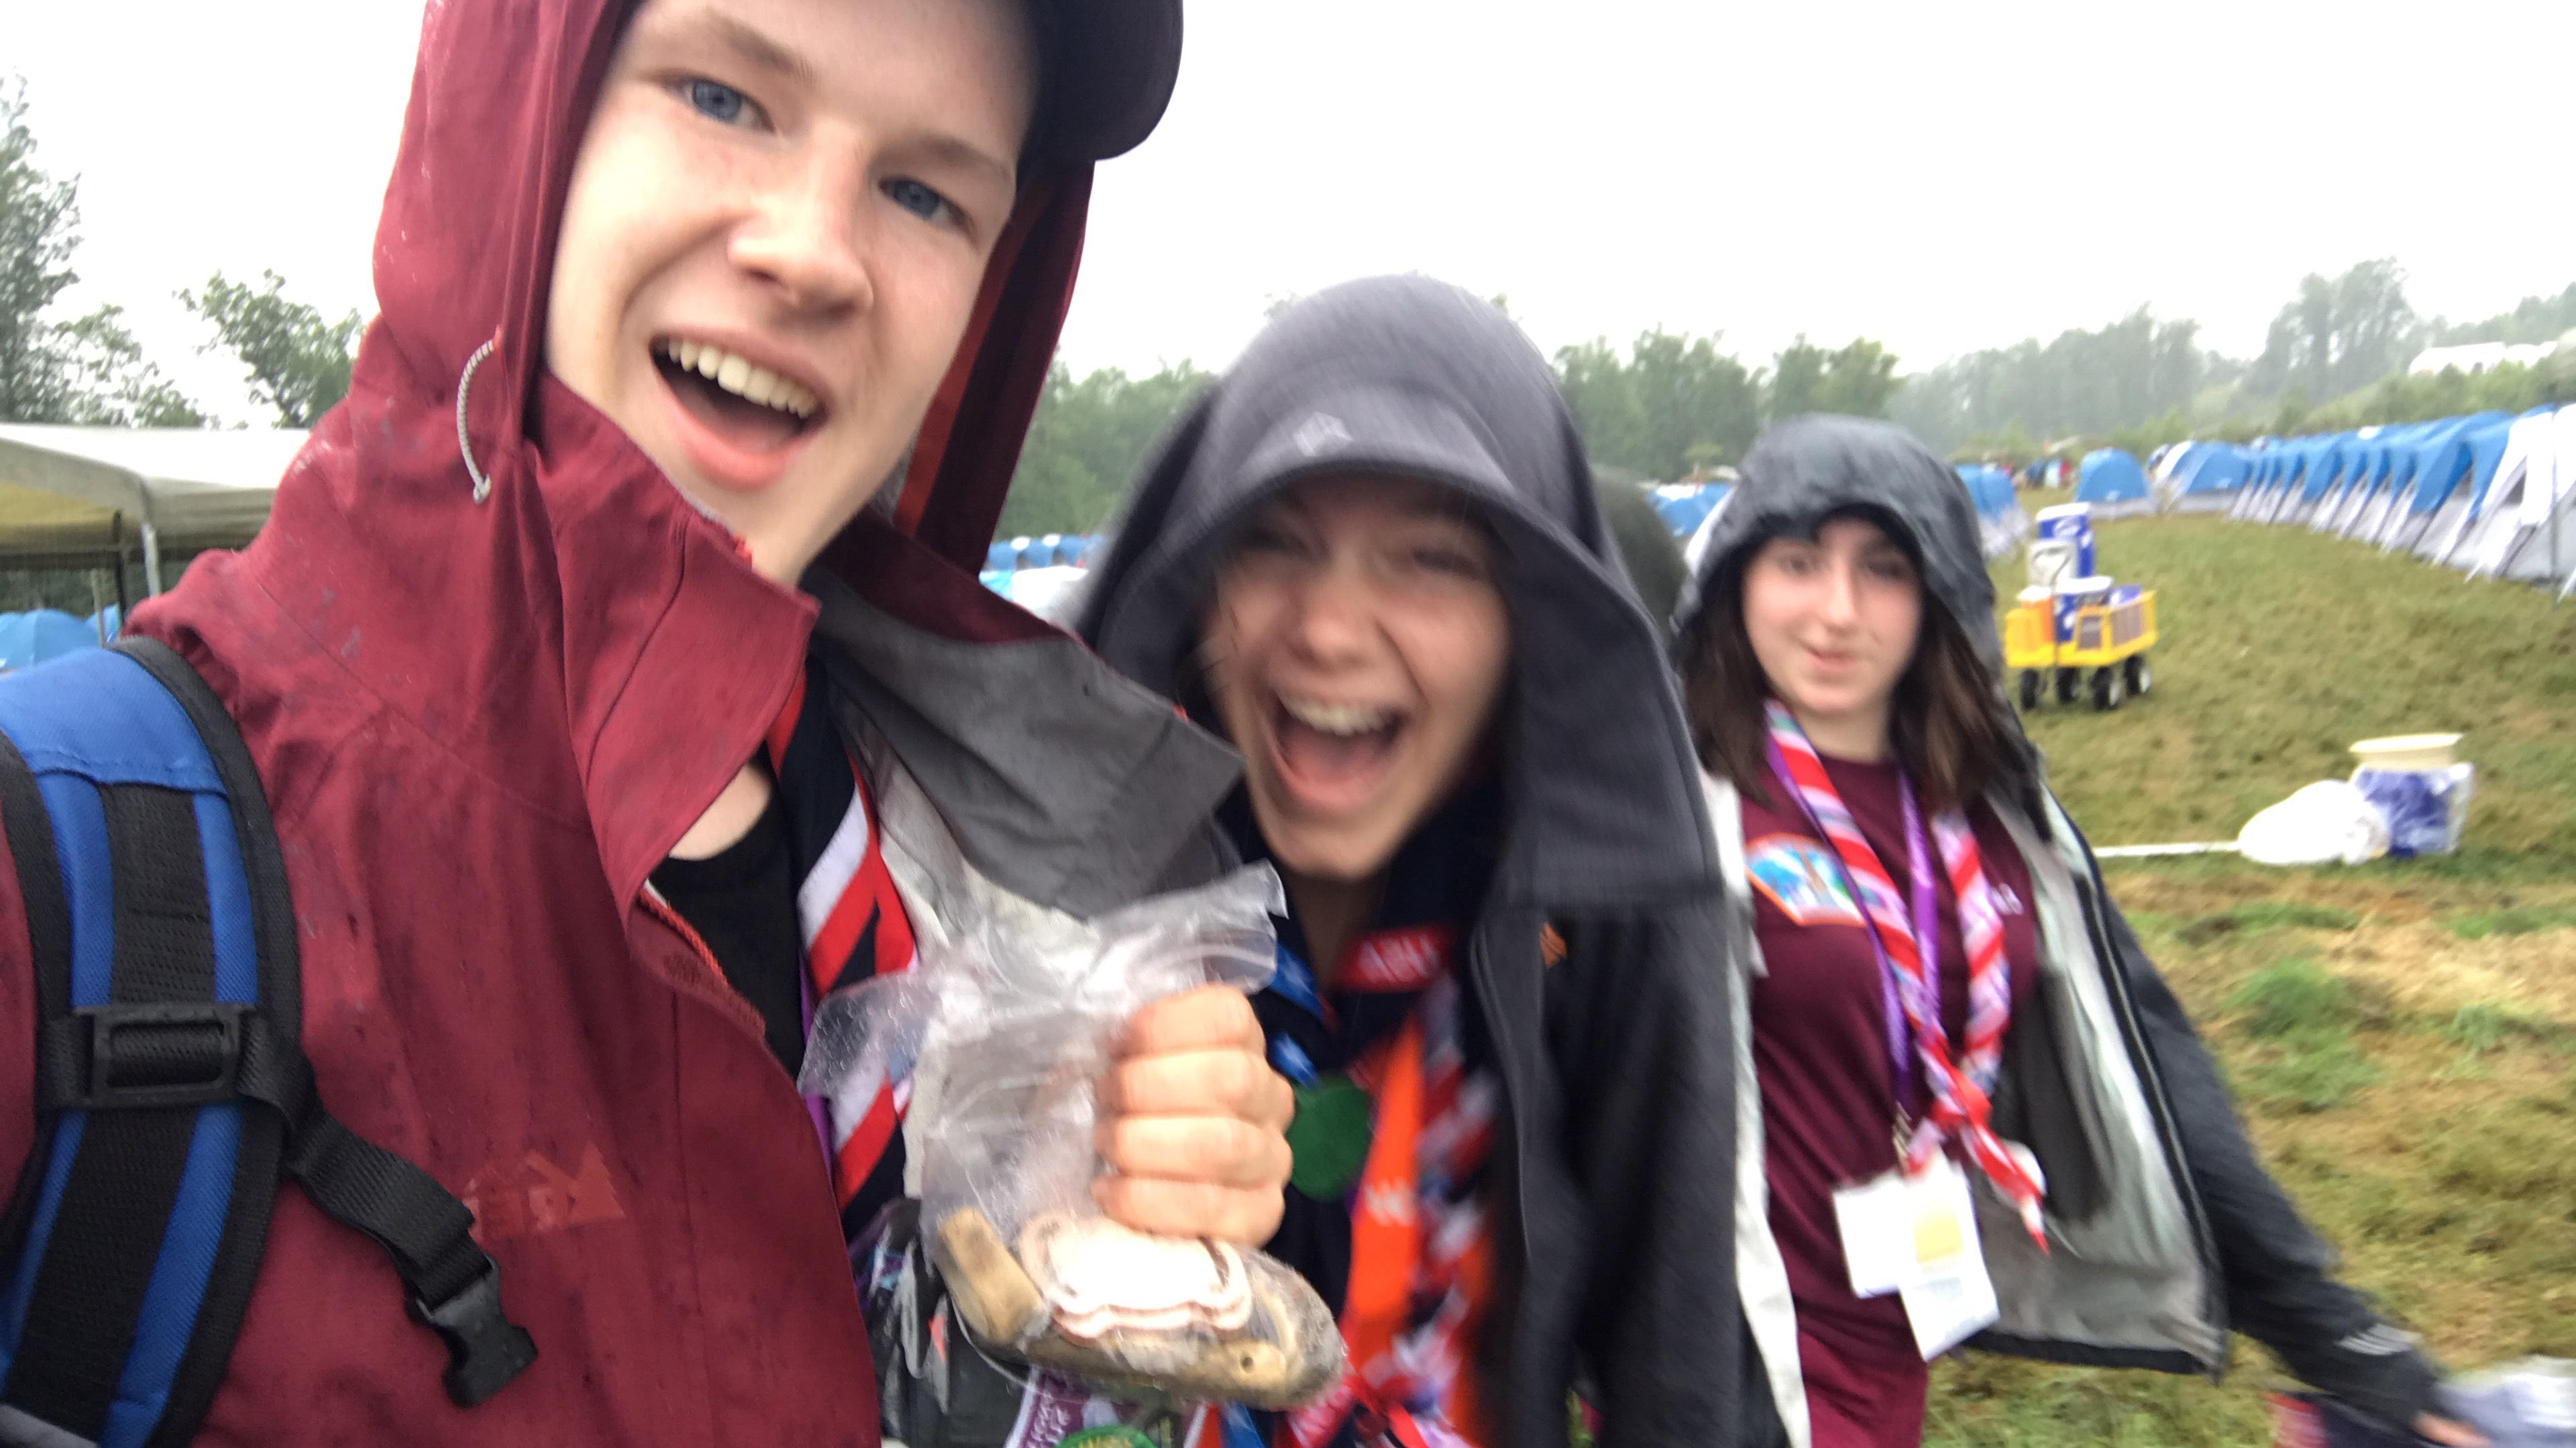 East Scotland arrive at the World Scout Jamboree